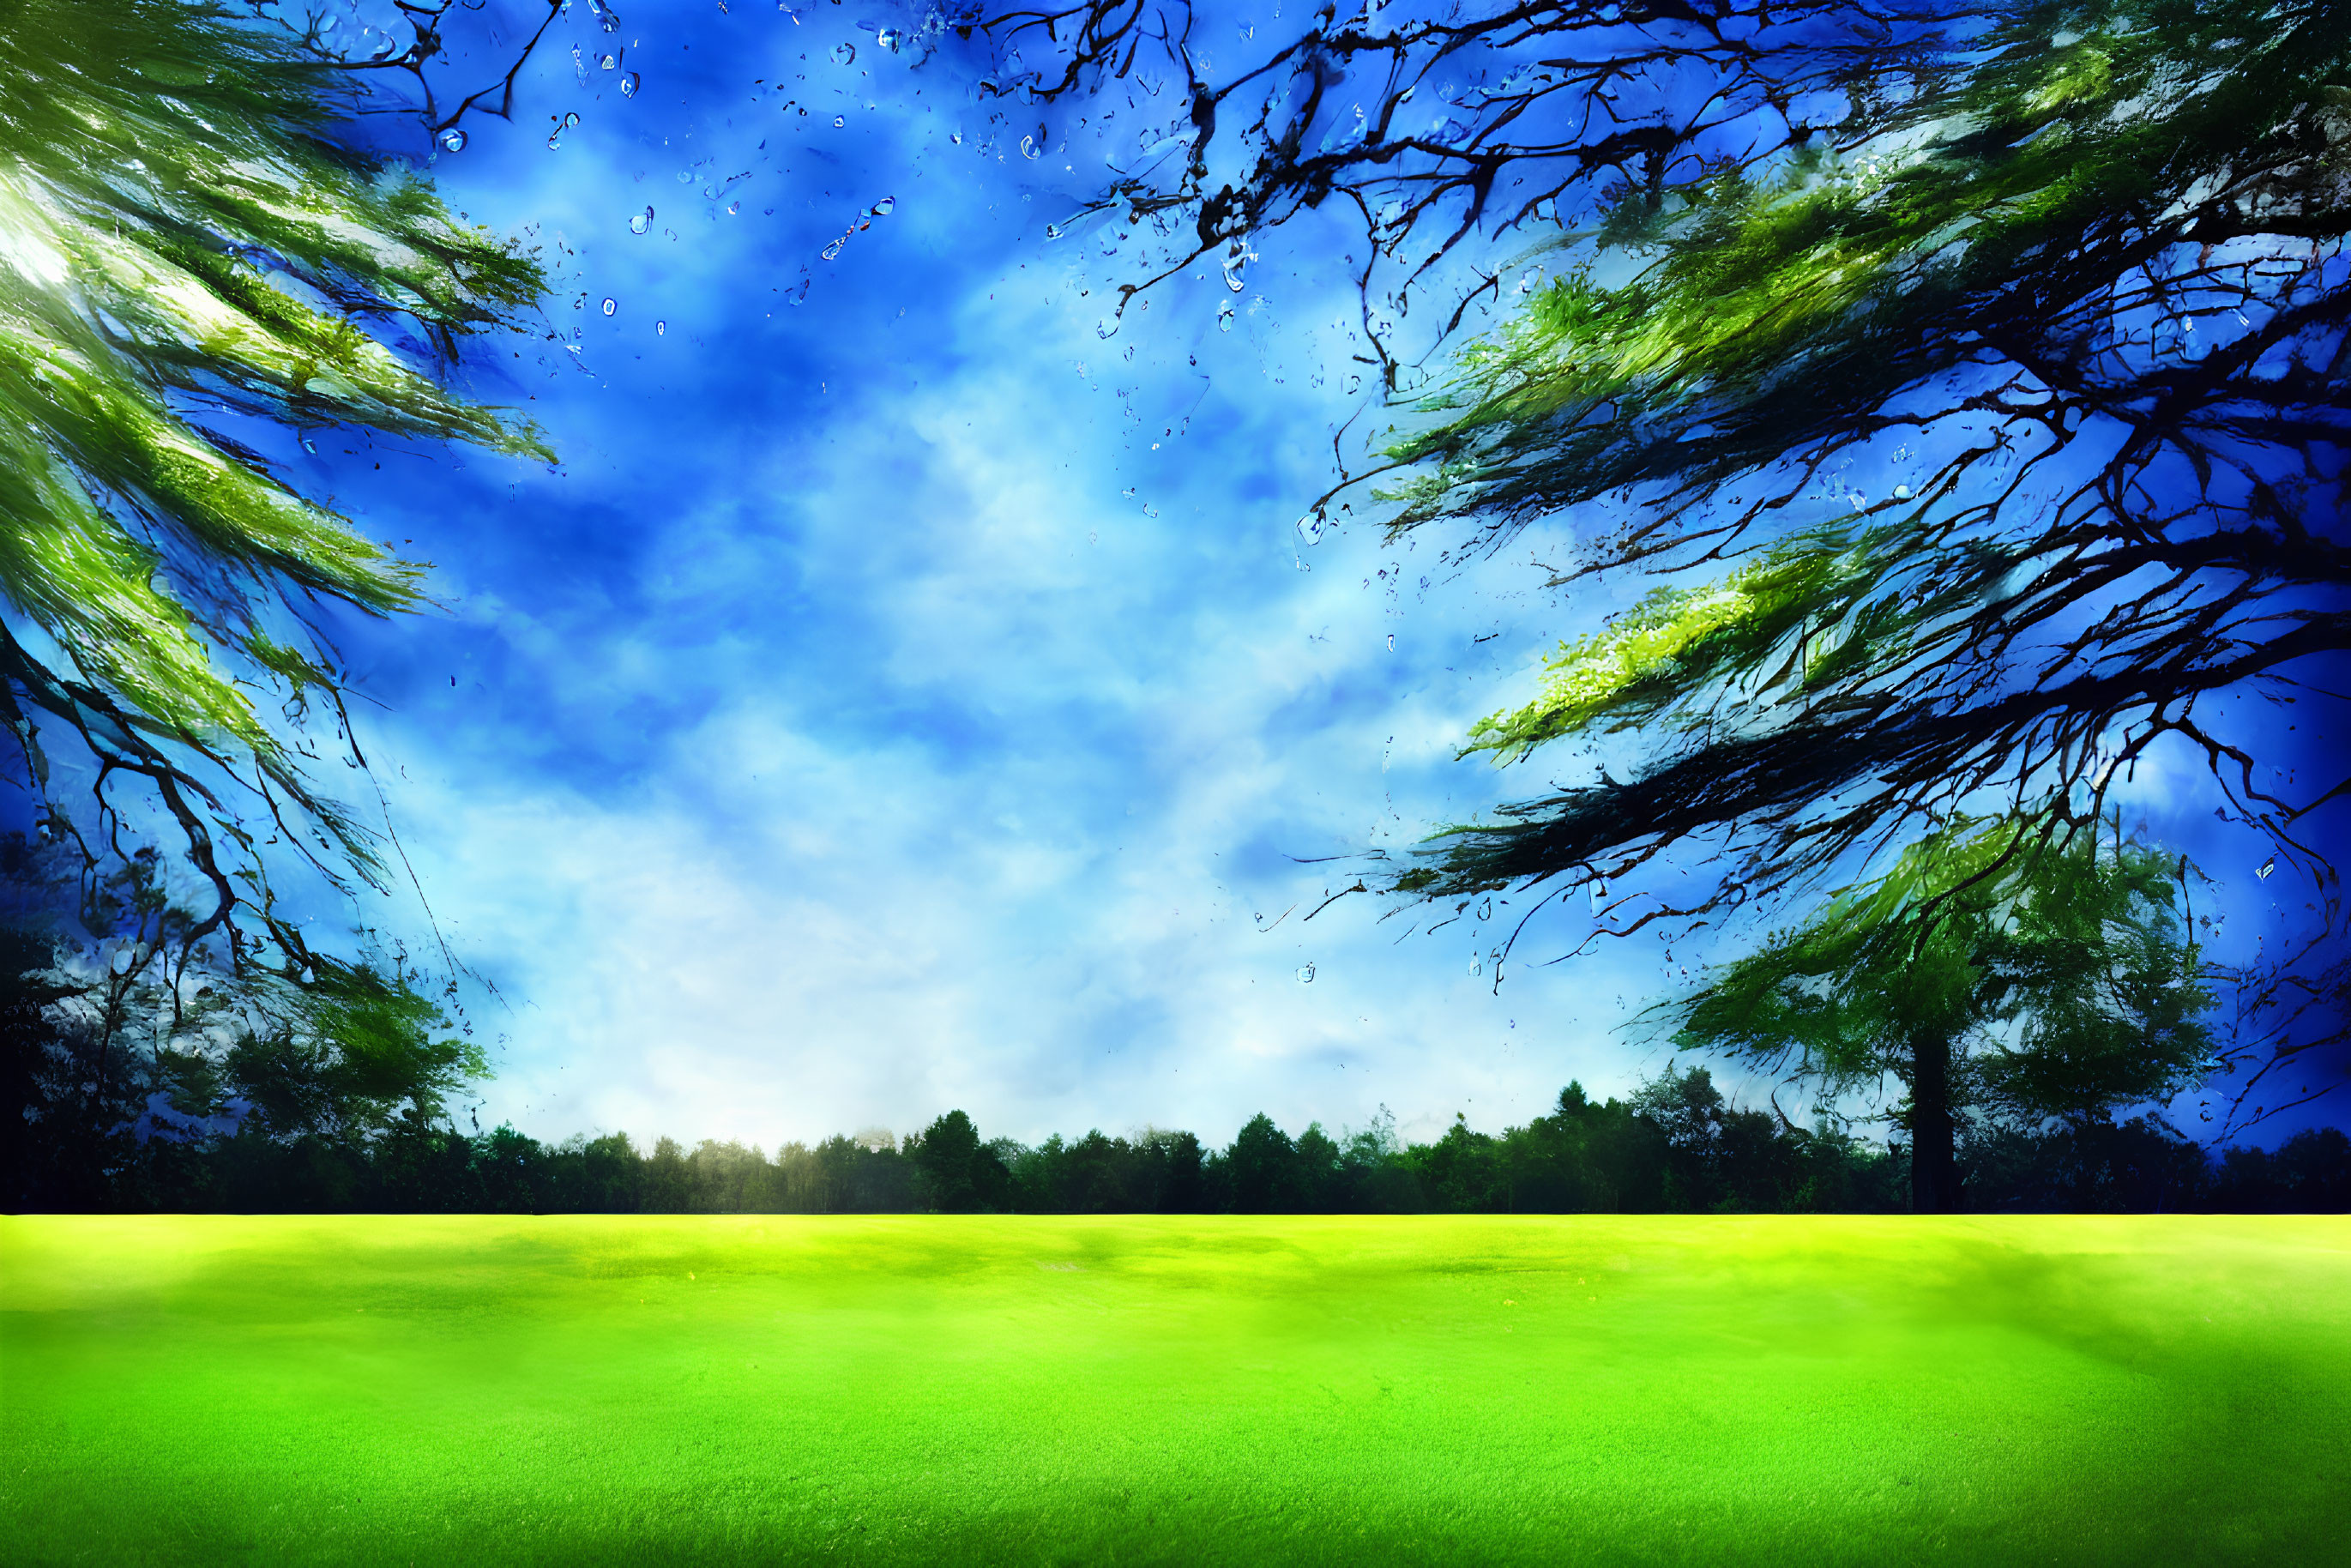 Lush green field under dynamic blue sky with swaying tree branches